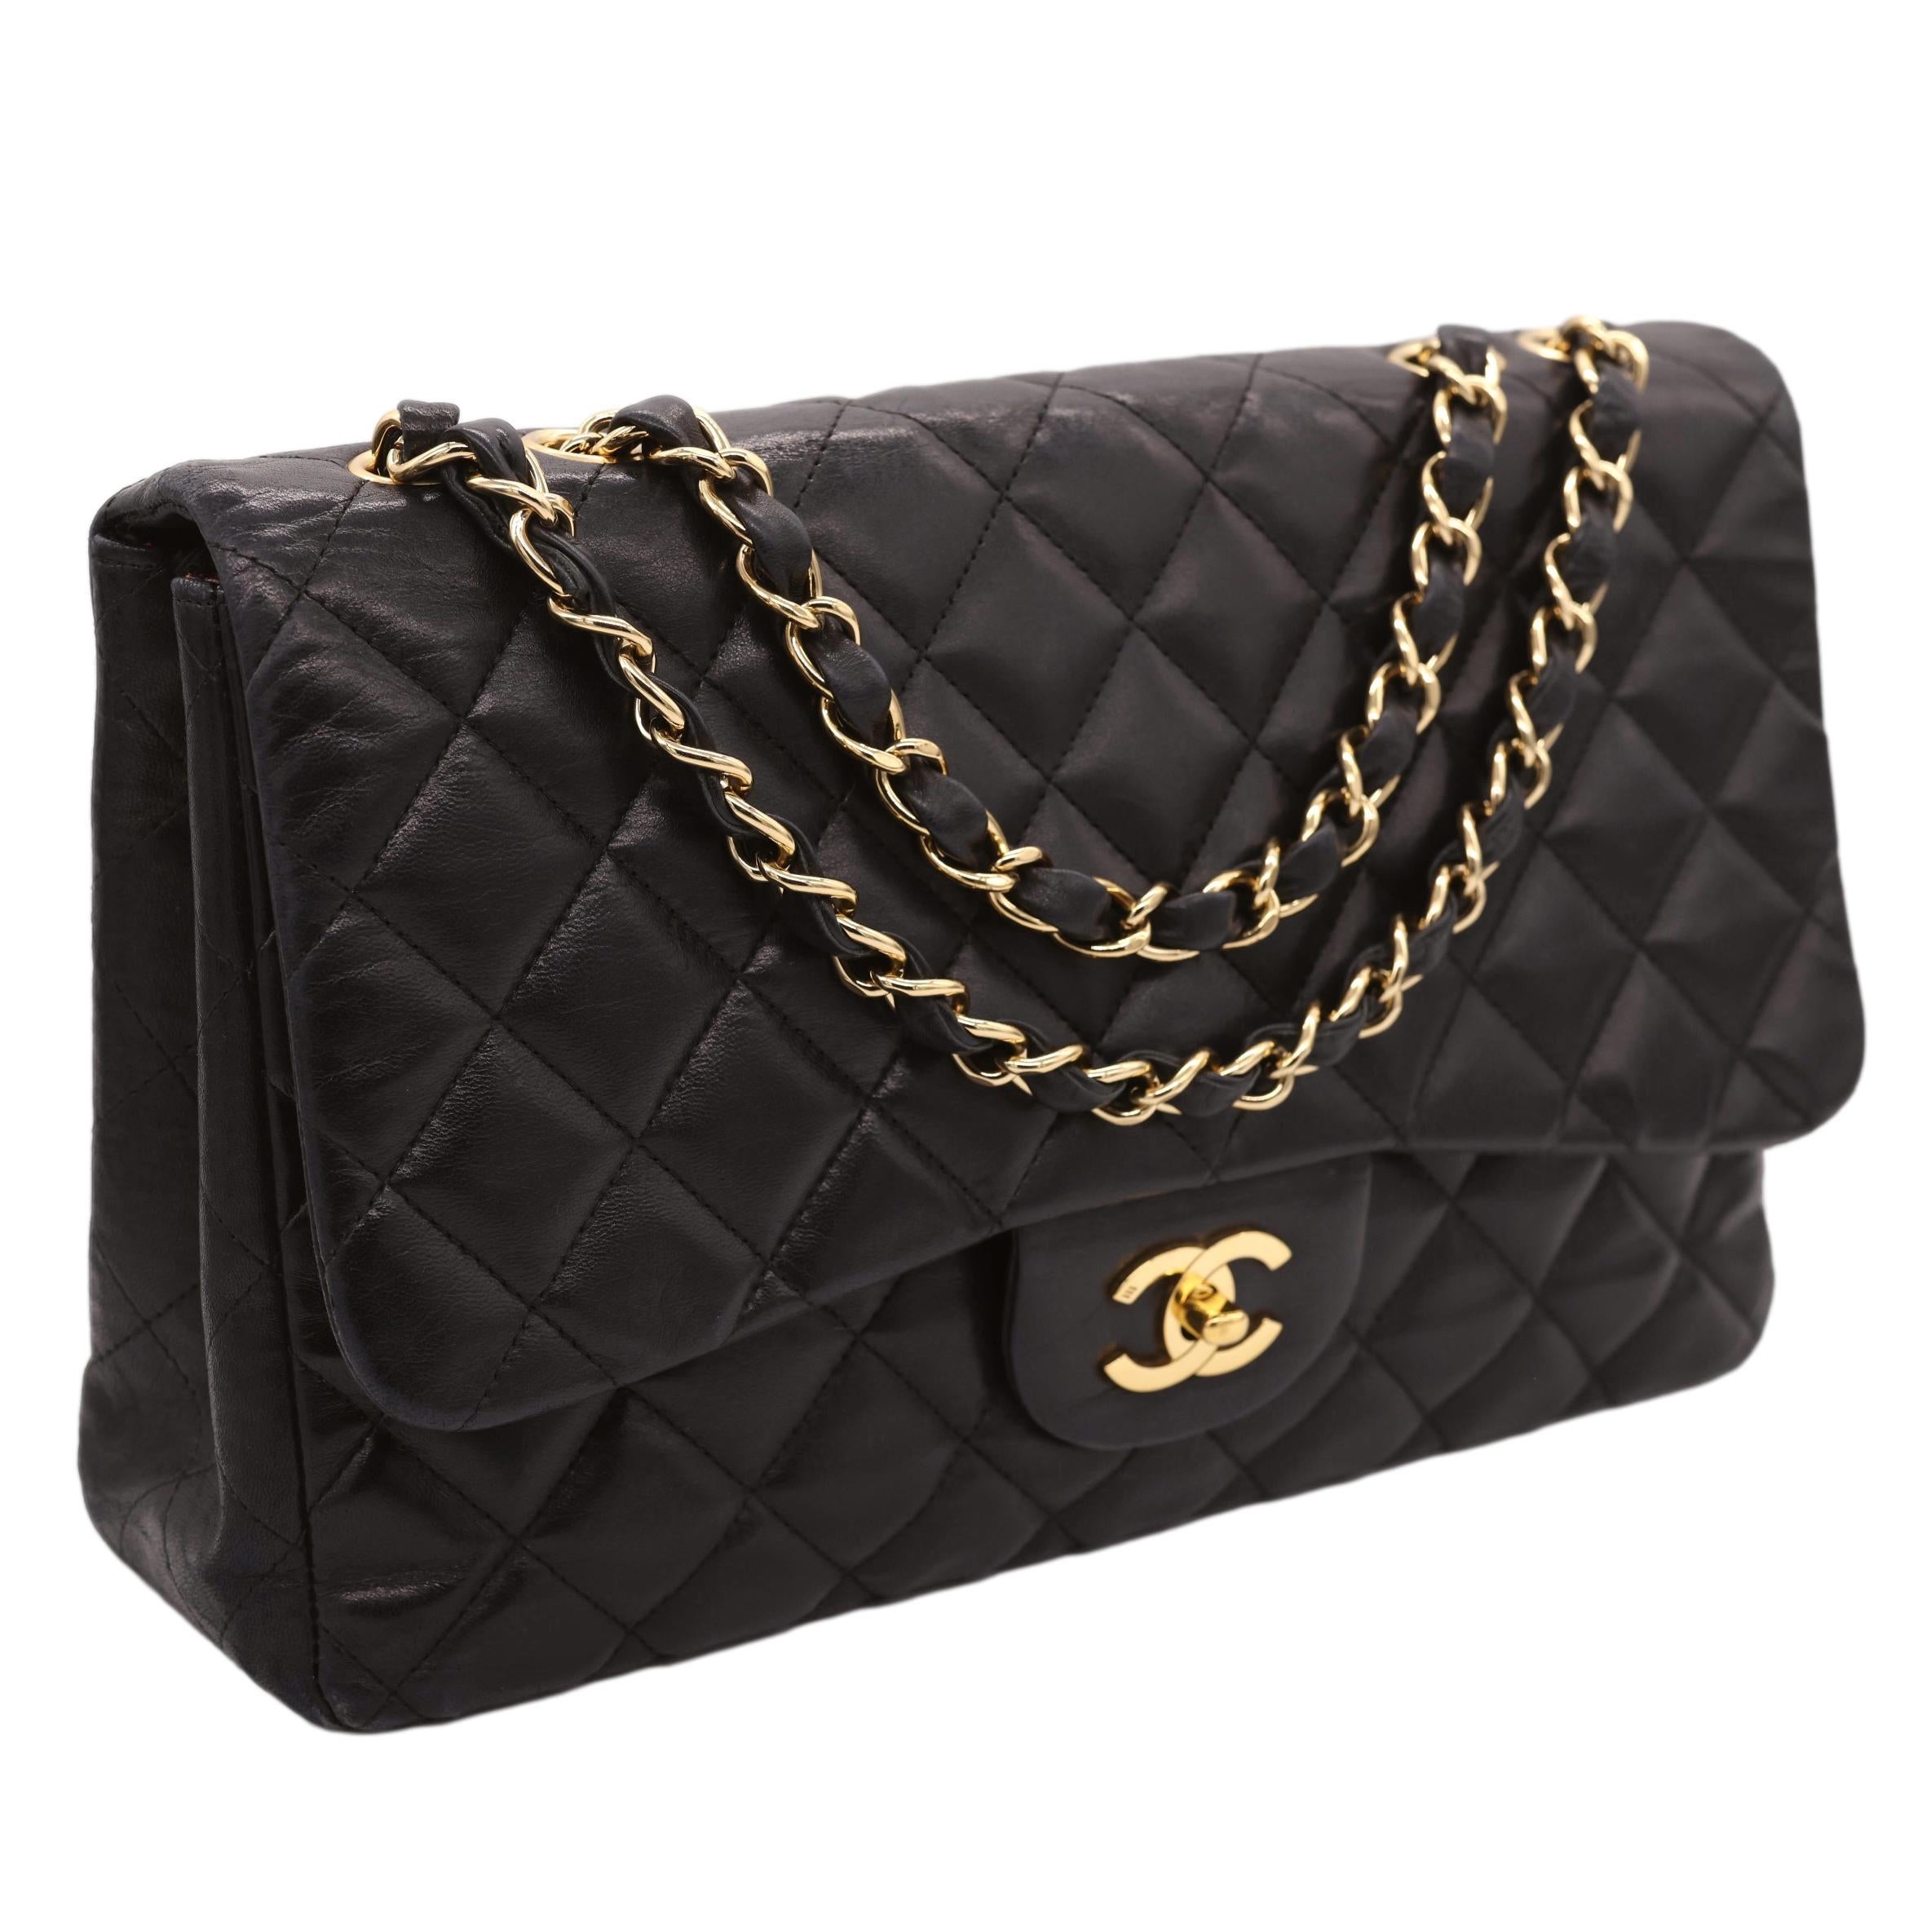 Chanel Timeless Black Jumbo Single Flap Quilted Lambskin Shoulder Bag, 2006 - 2008. The iconic Chanel bag was originally issued by Coco Chanel in February 1955 which became the very first socially acceptable shoulder bag for the modern day woman of